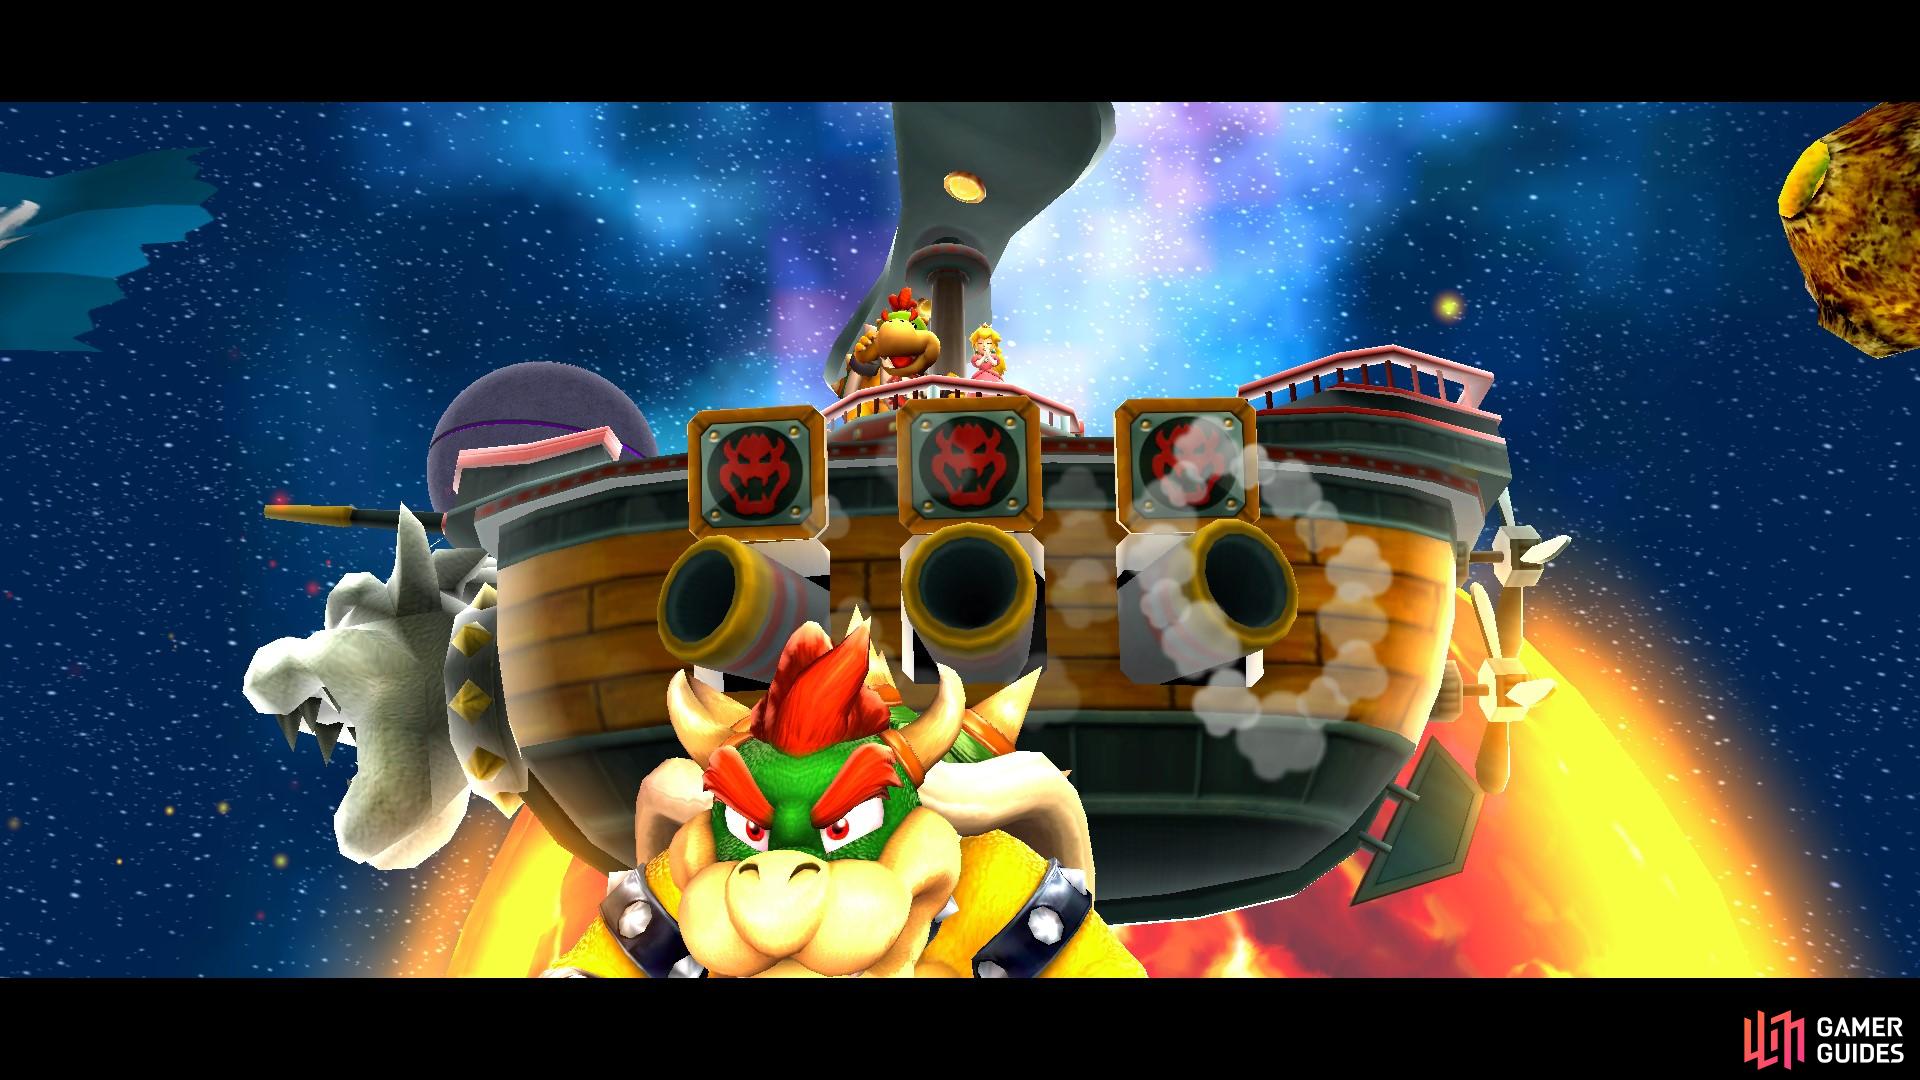 The Fate of the Universe is where you’ll have your final fight with Bowser!